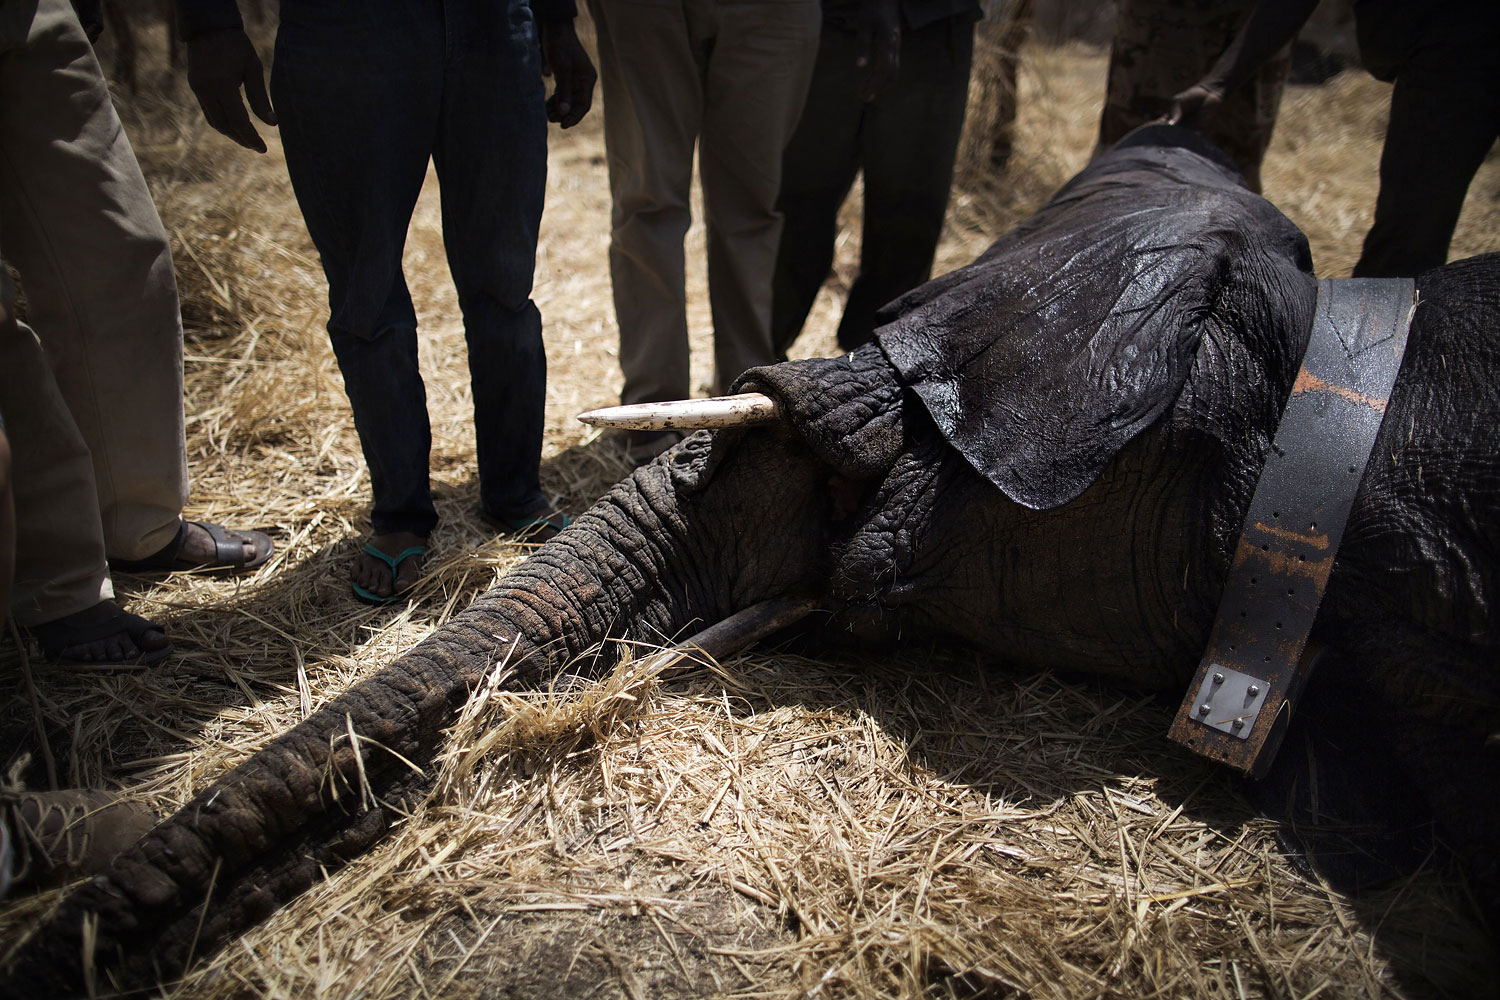 A collared elephant, darted at the Zakouma National on Park Feb. 23, 2014 rests, sedated.